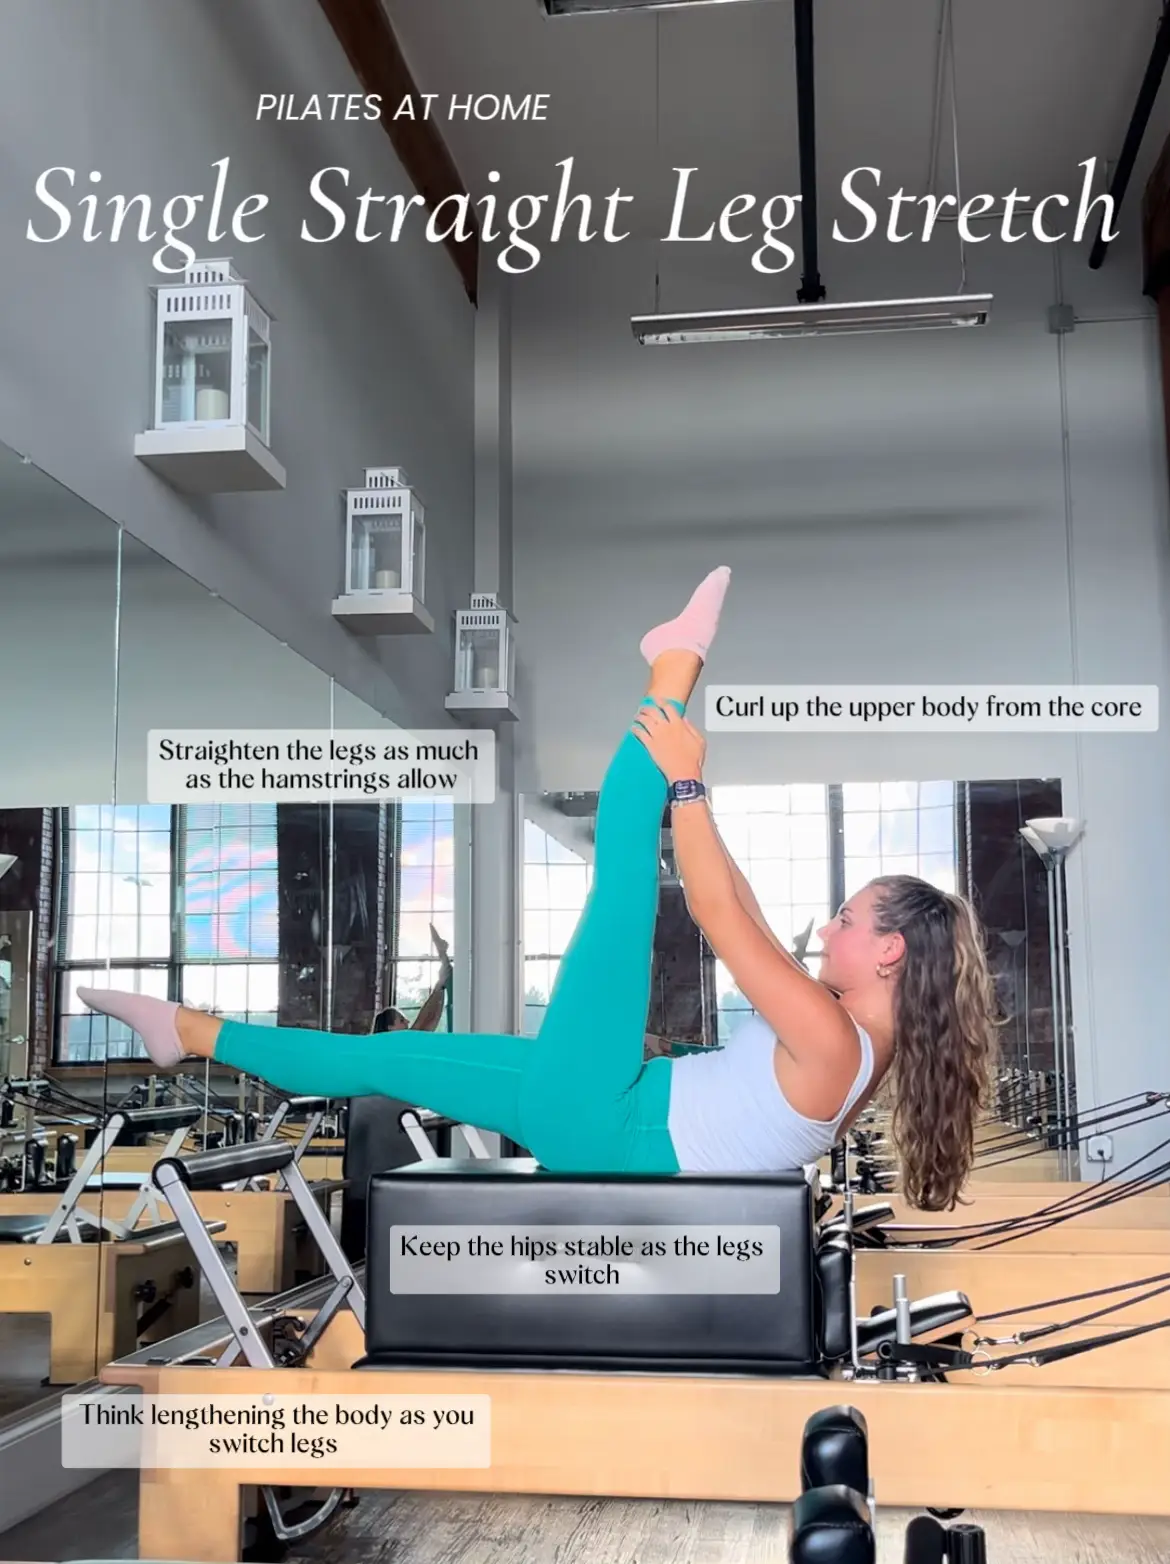 Single Straight Leg Stretch Exercise for the Hamstrings and Abs